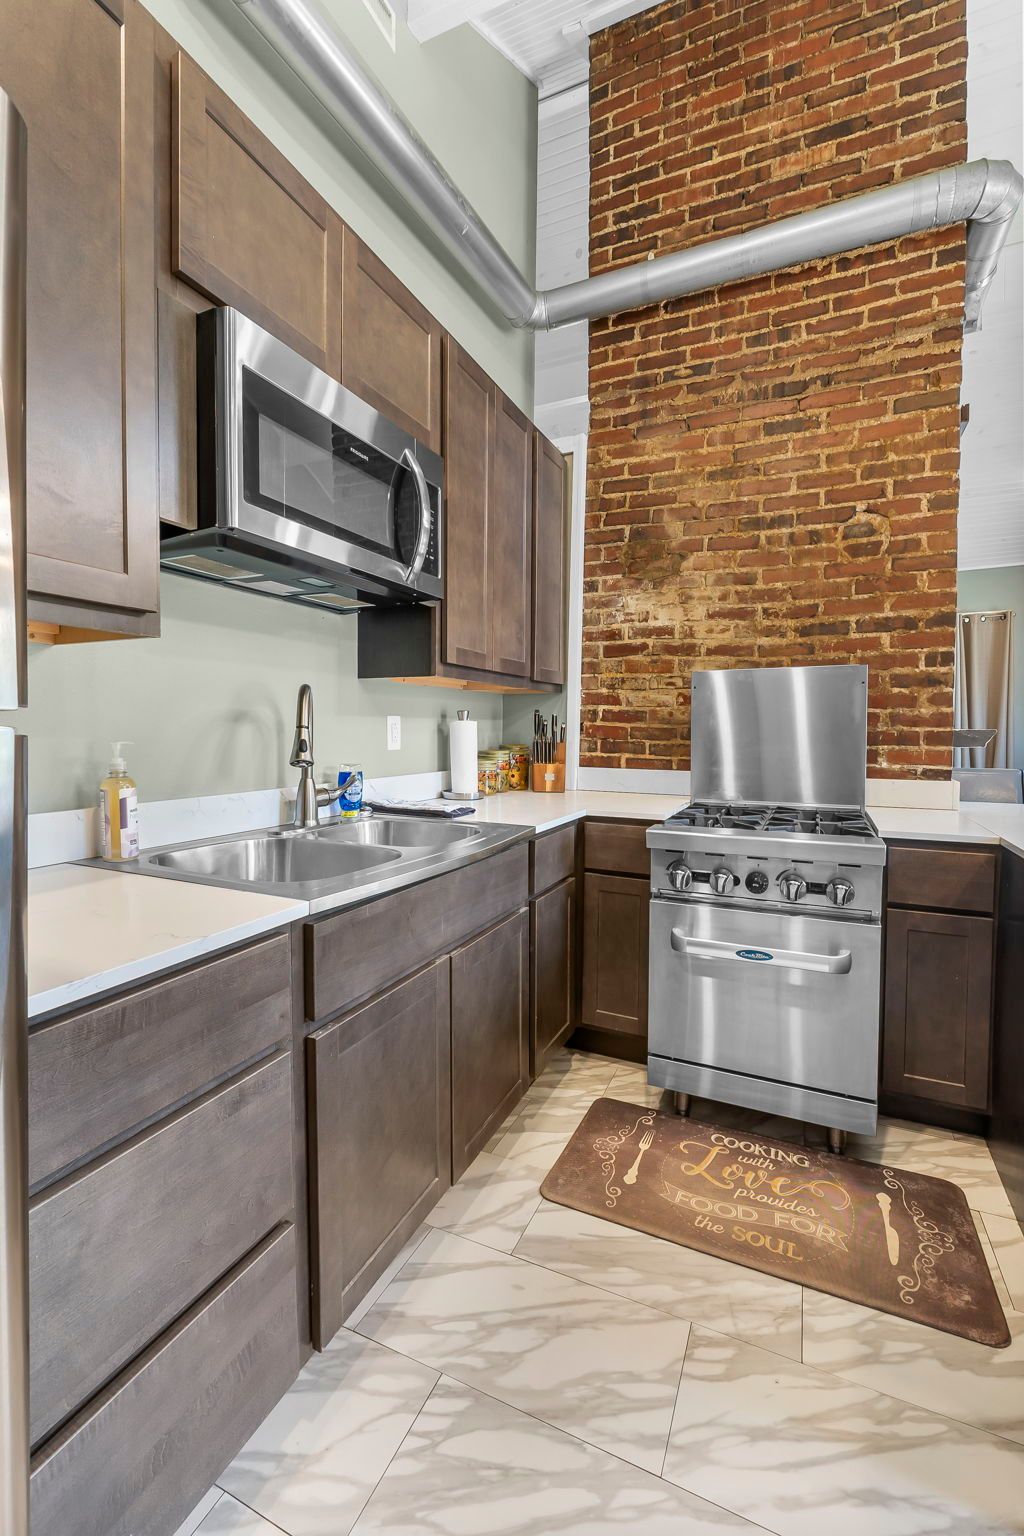 A kitchen with stainless steel appliances and a brick wall.